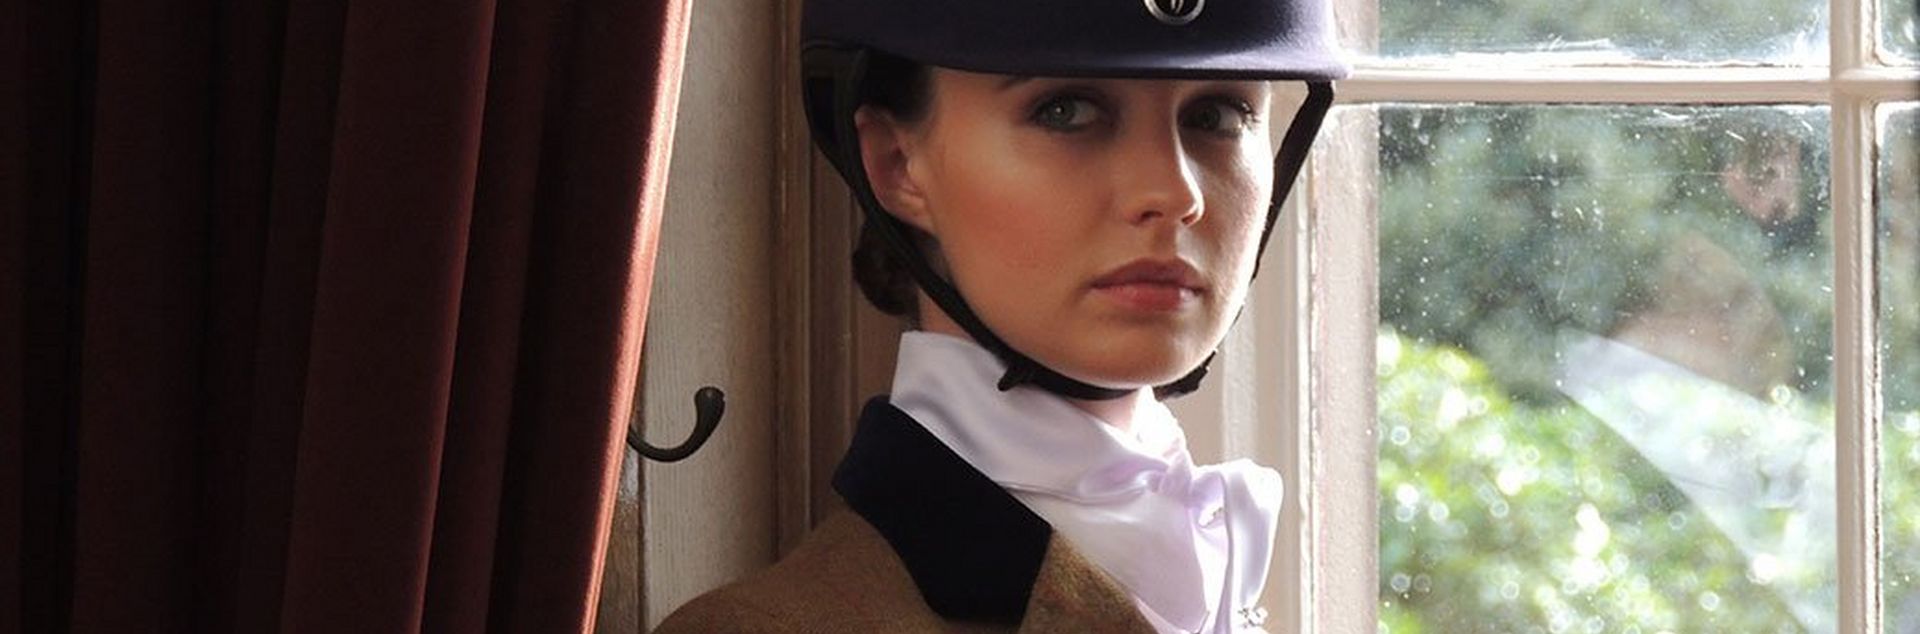 5 Aspects You Need To Consider For Your Next Horse Riding Hat Purchase